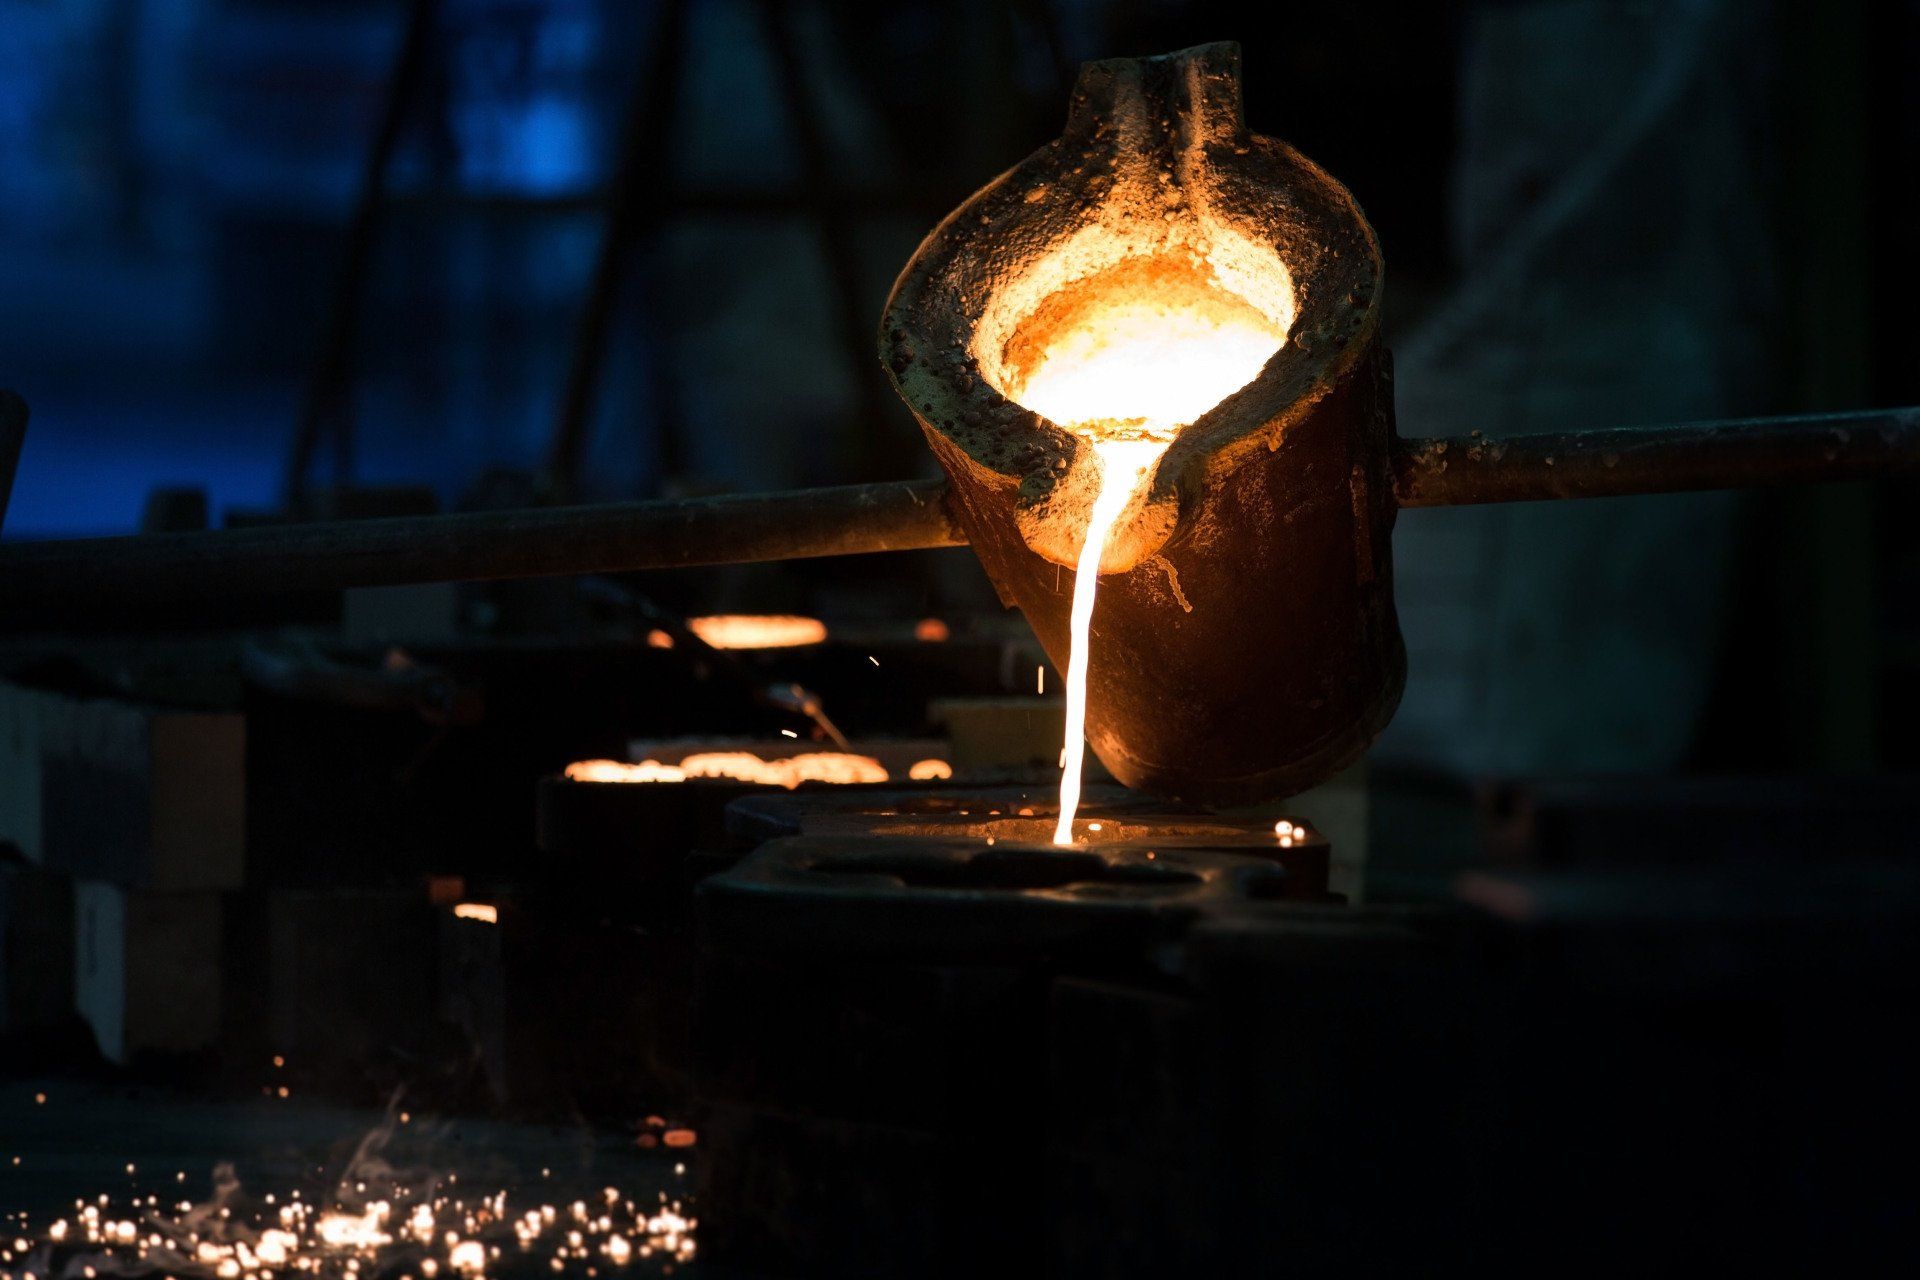 steel casting foundry